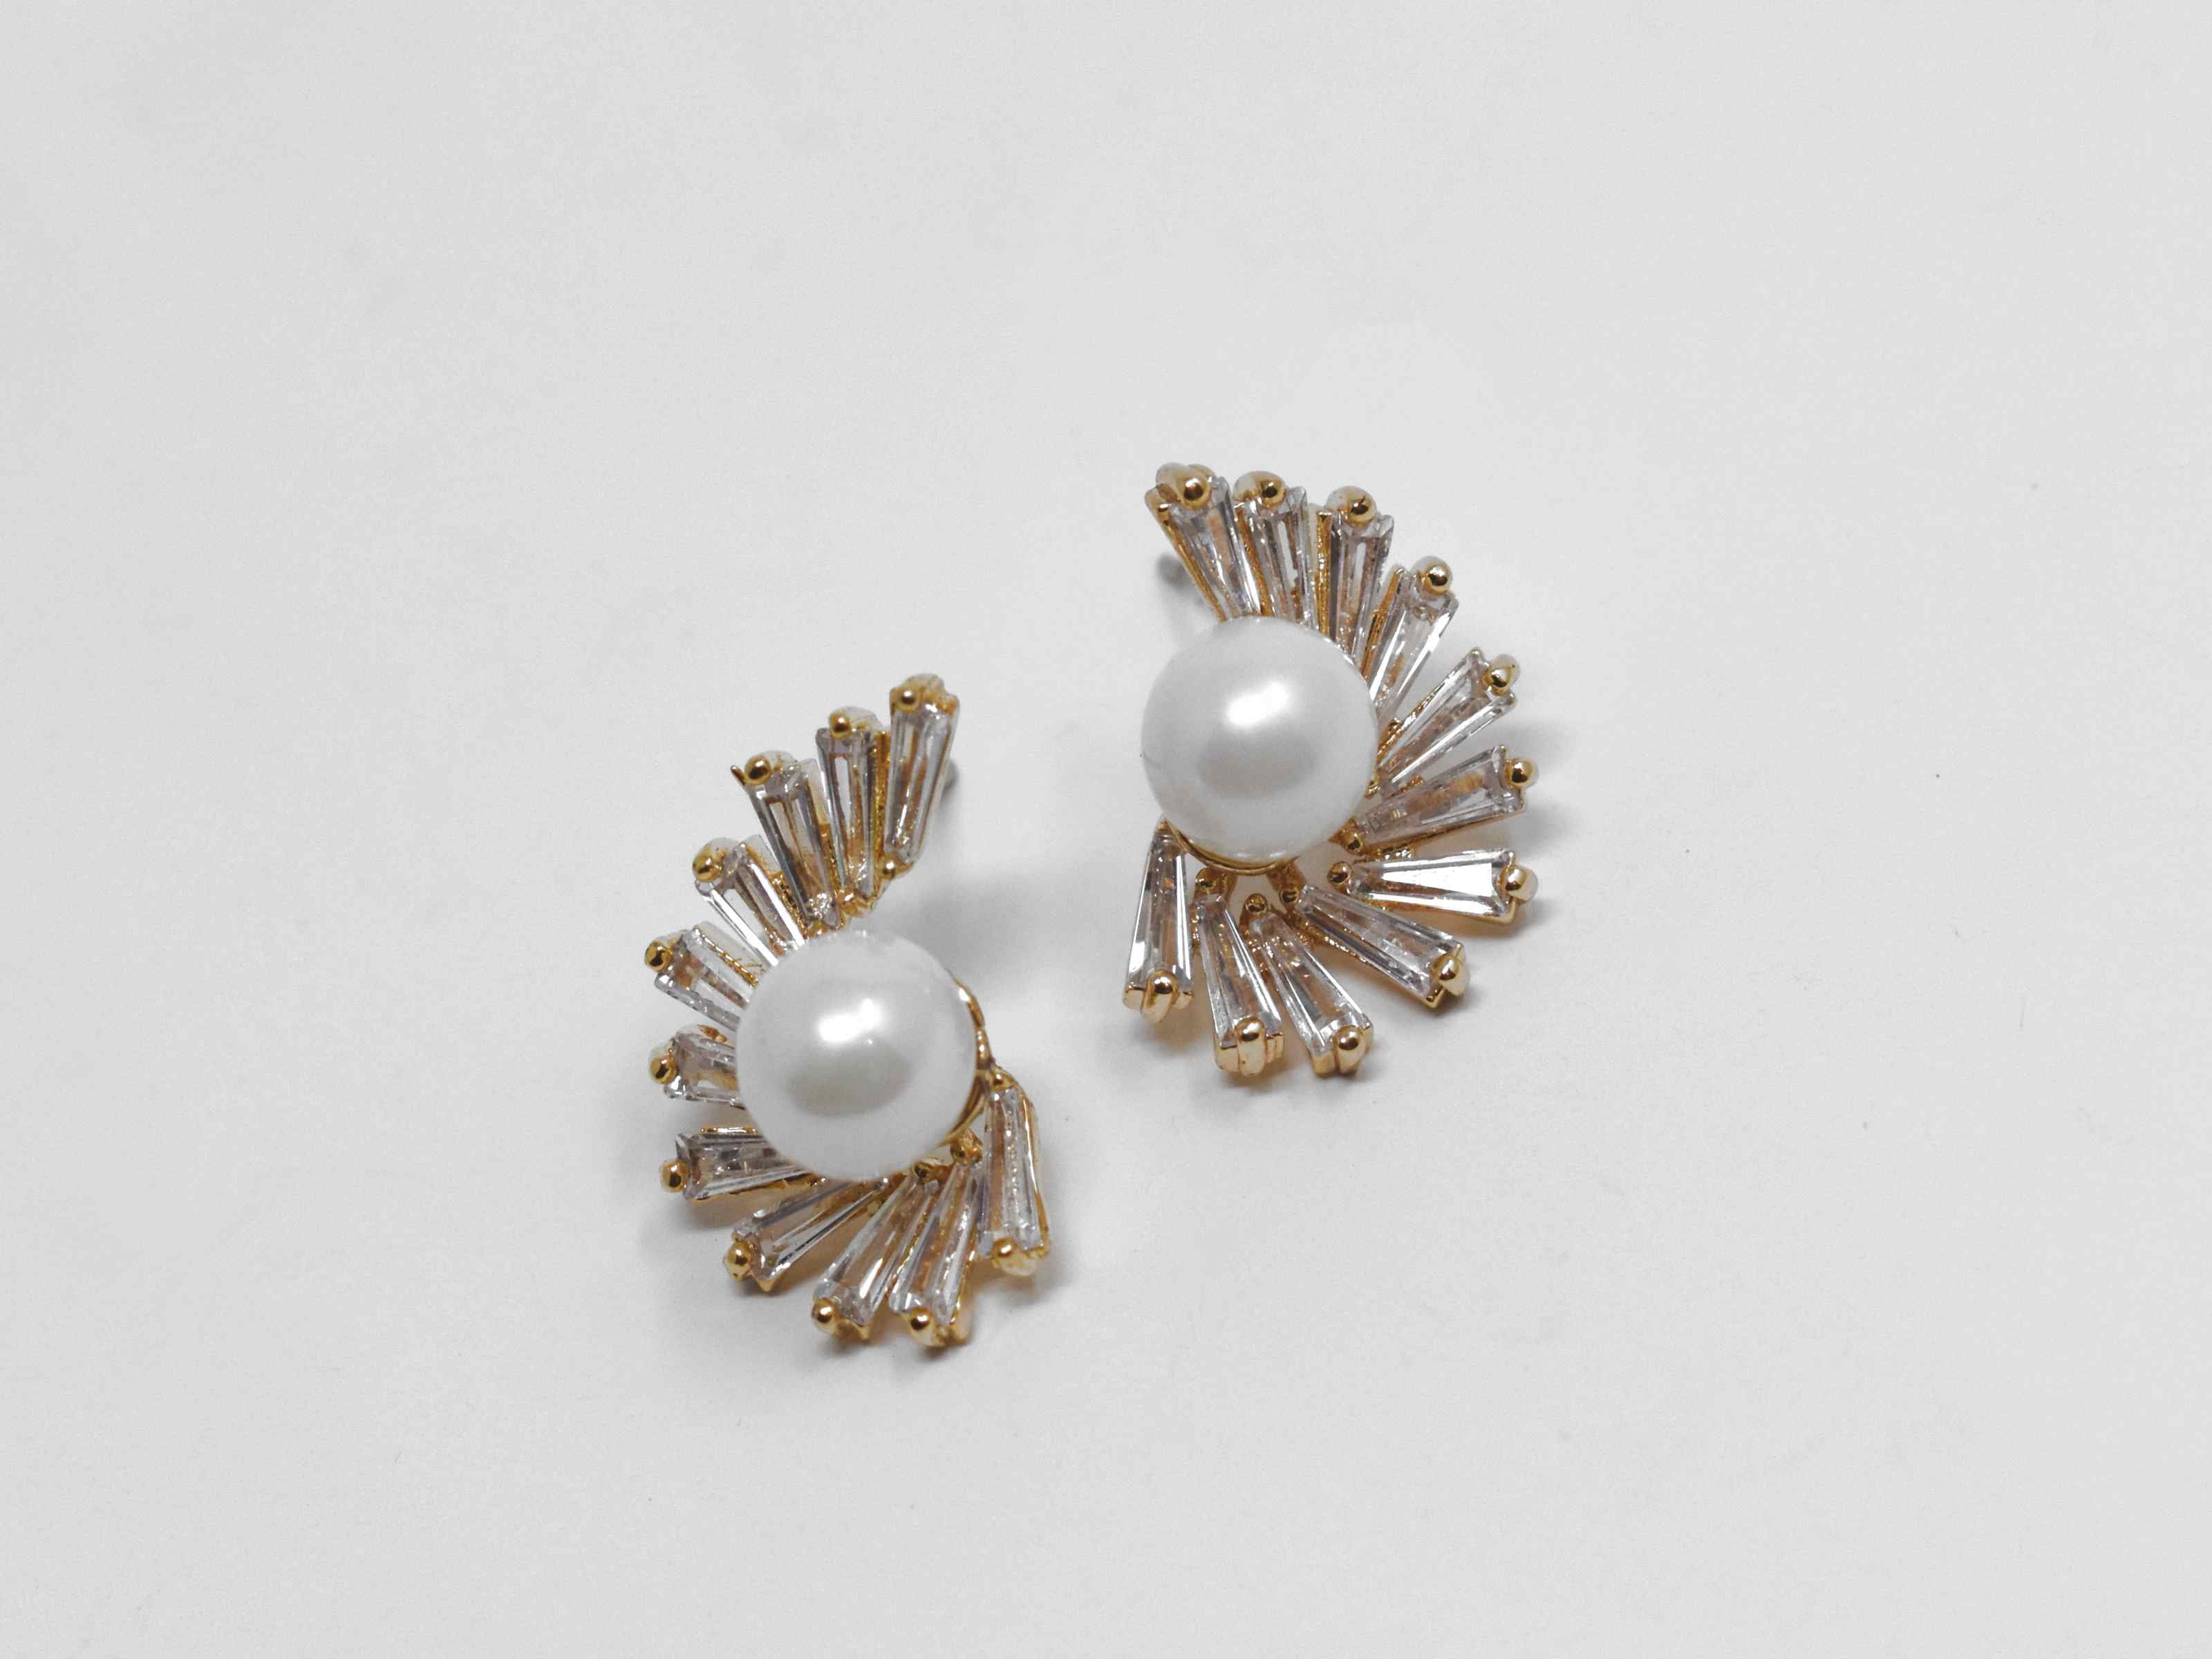 Our bouvardia earrings are a beautiful classic with a modern twist. These knob earrings have a pearl core adorned with cascading stones. They are 3/4 of an inch in length with a push back clasp.